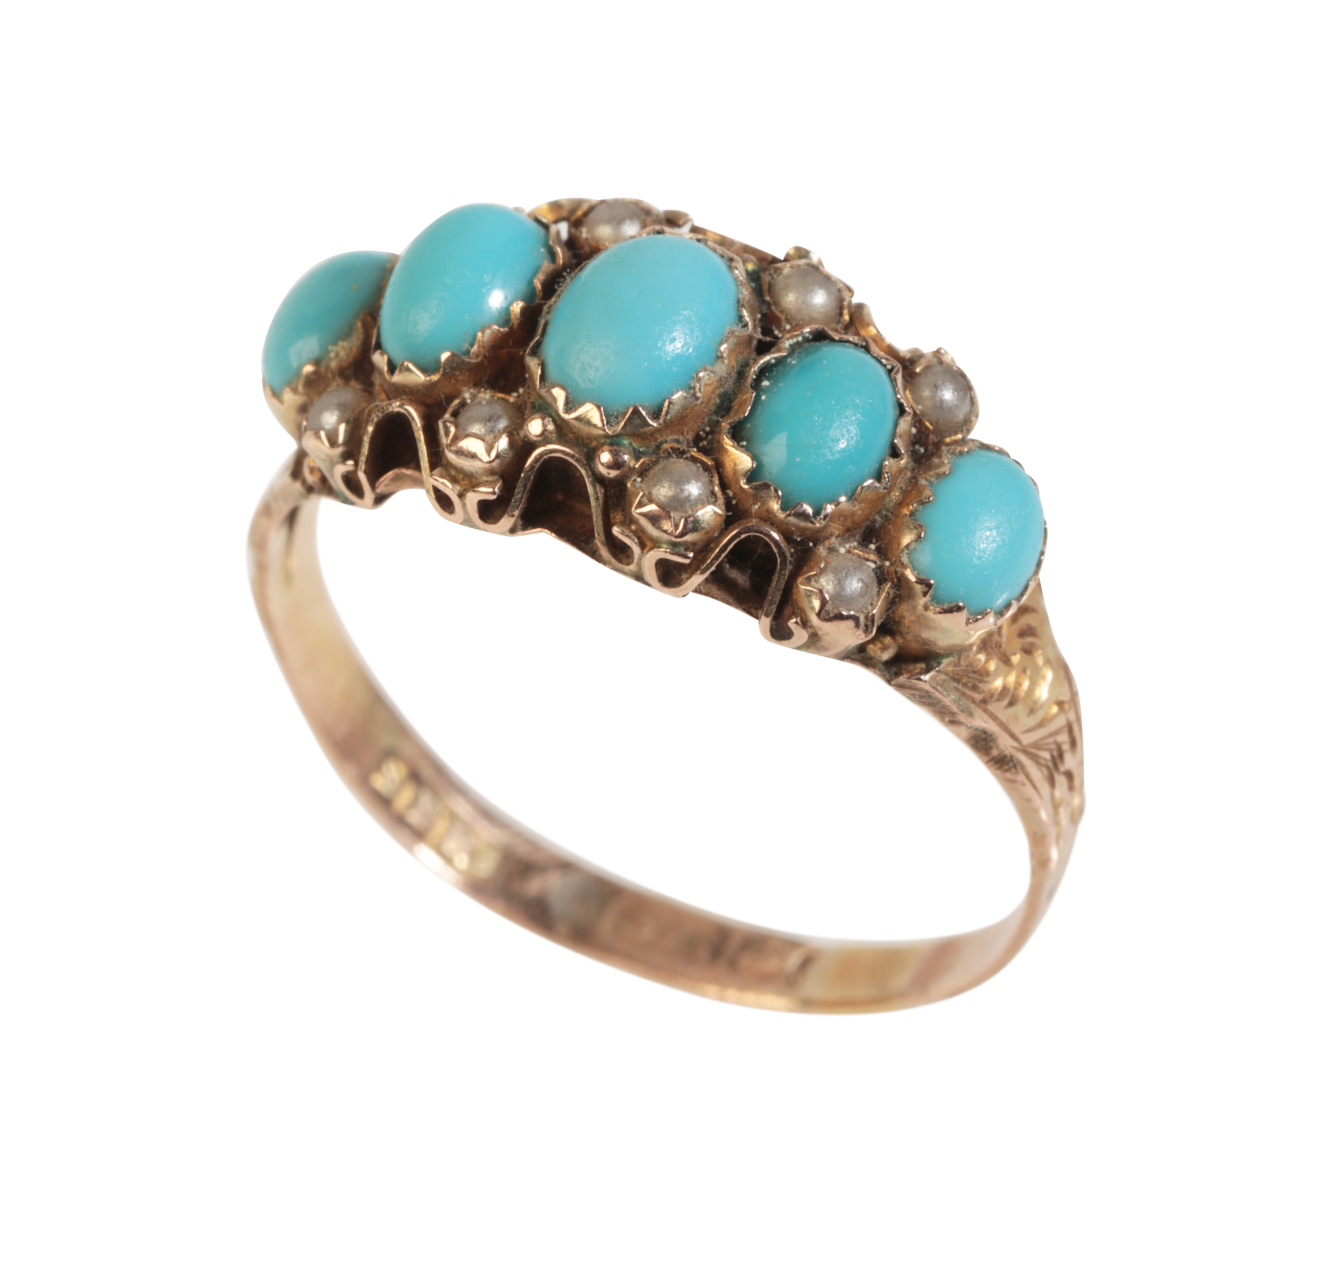 AN ANTIQUE TURQUOISE AND PEARL RING